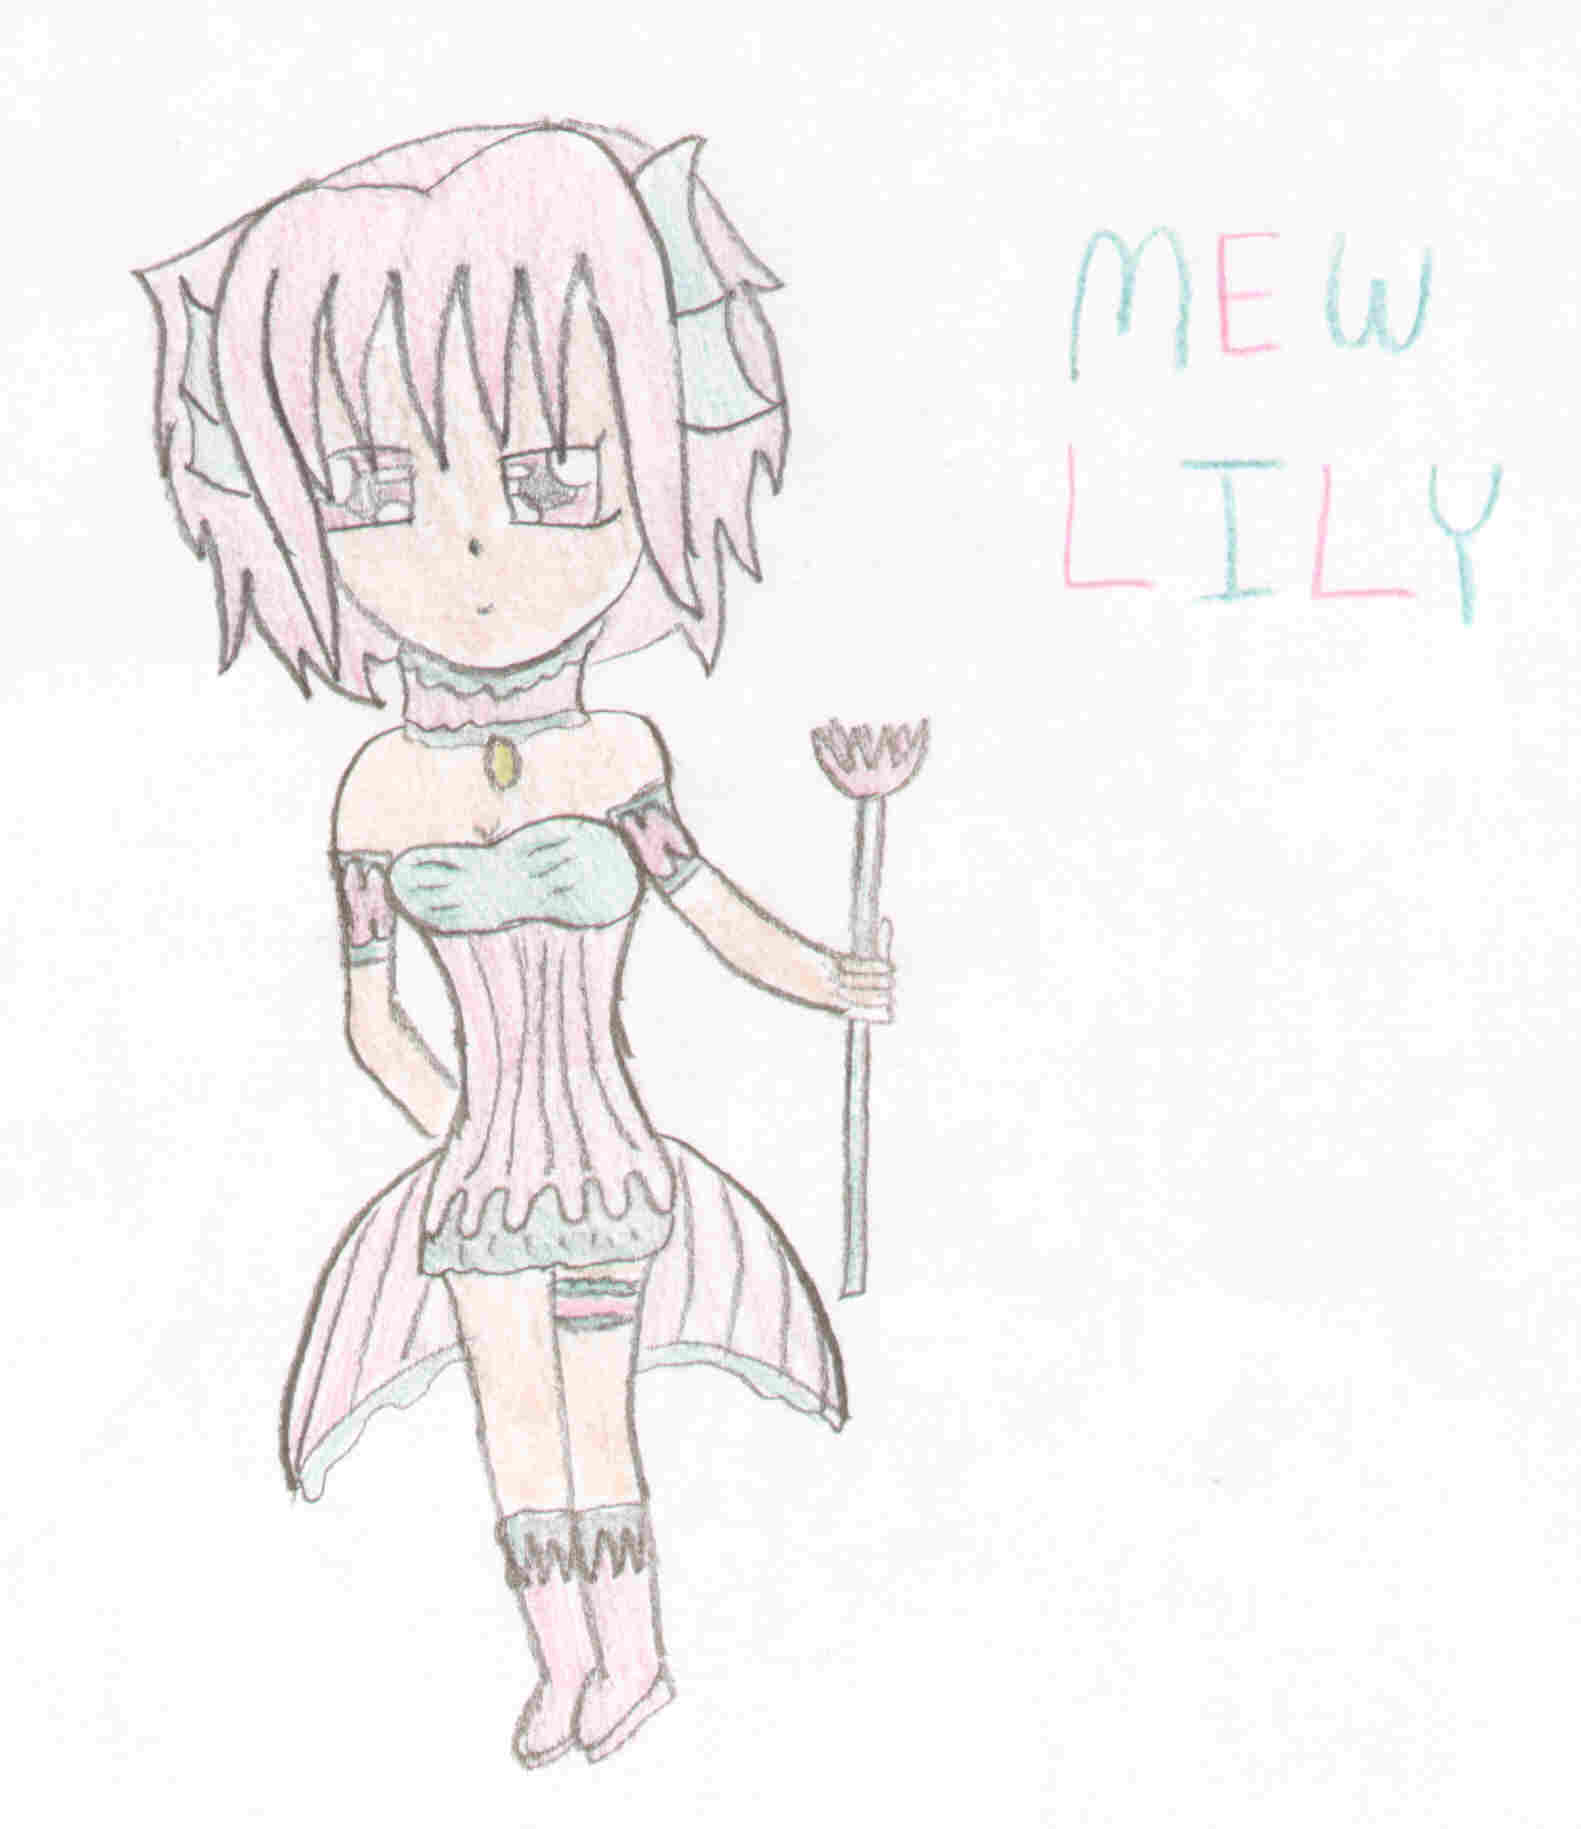 Mew lily by theluverofanime